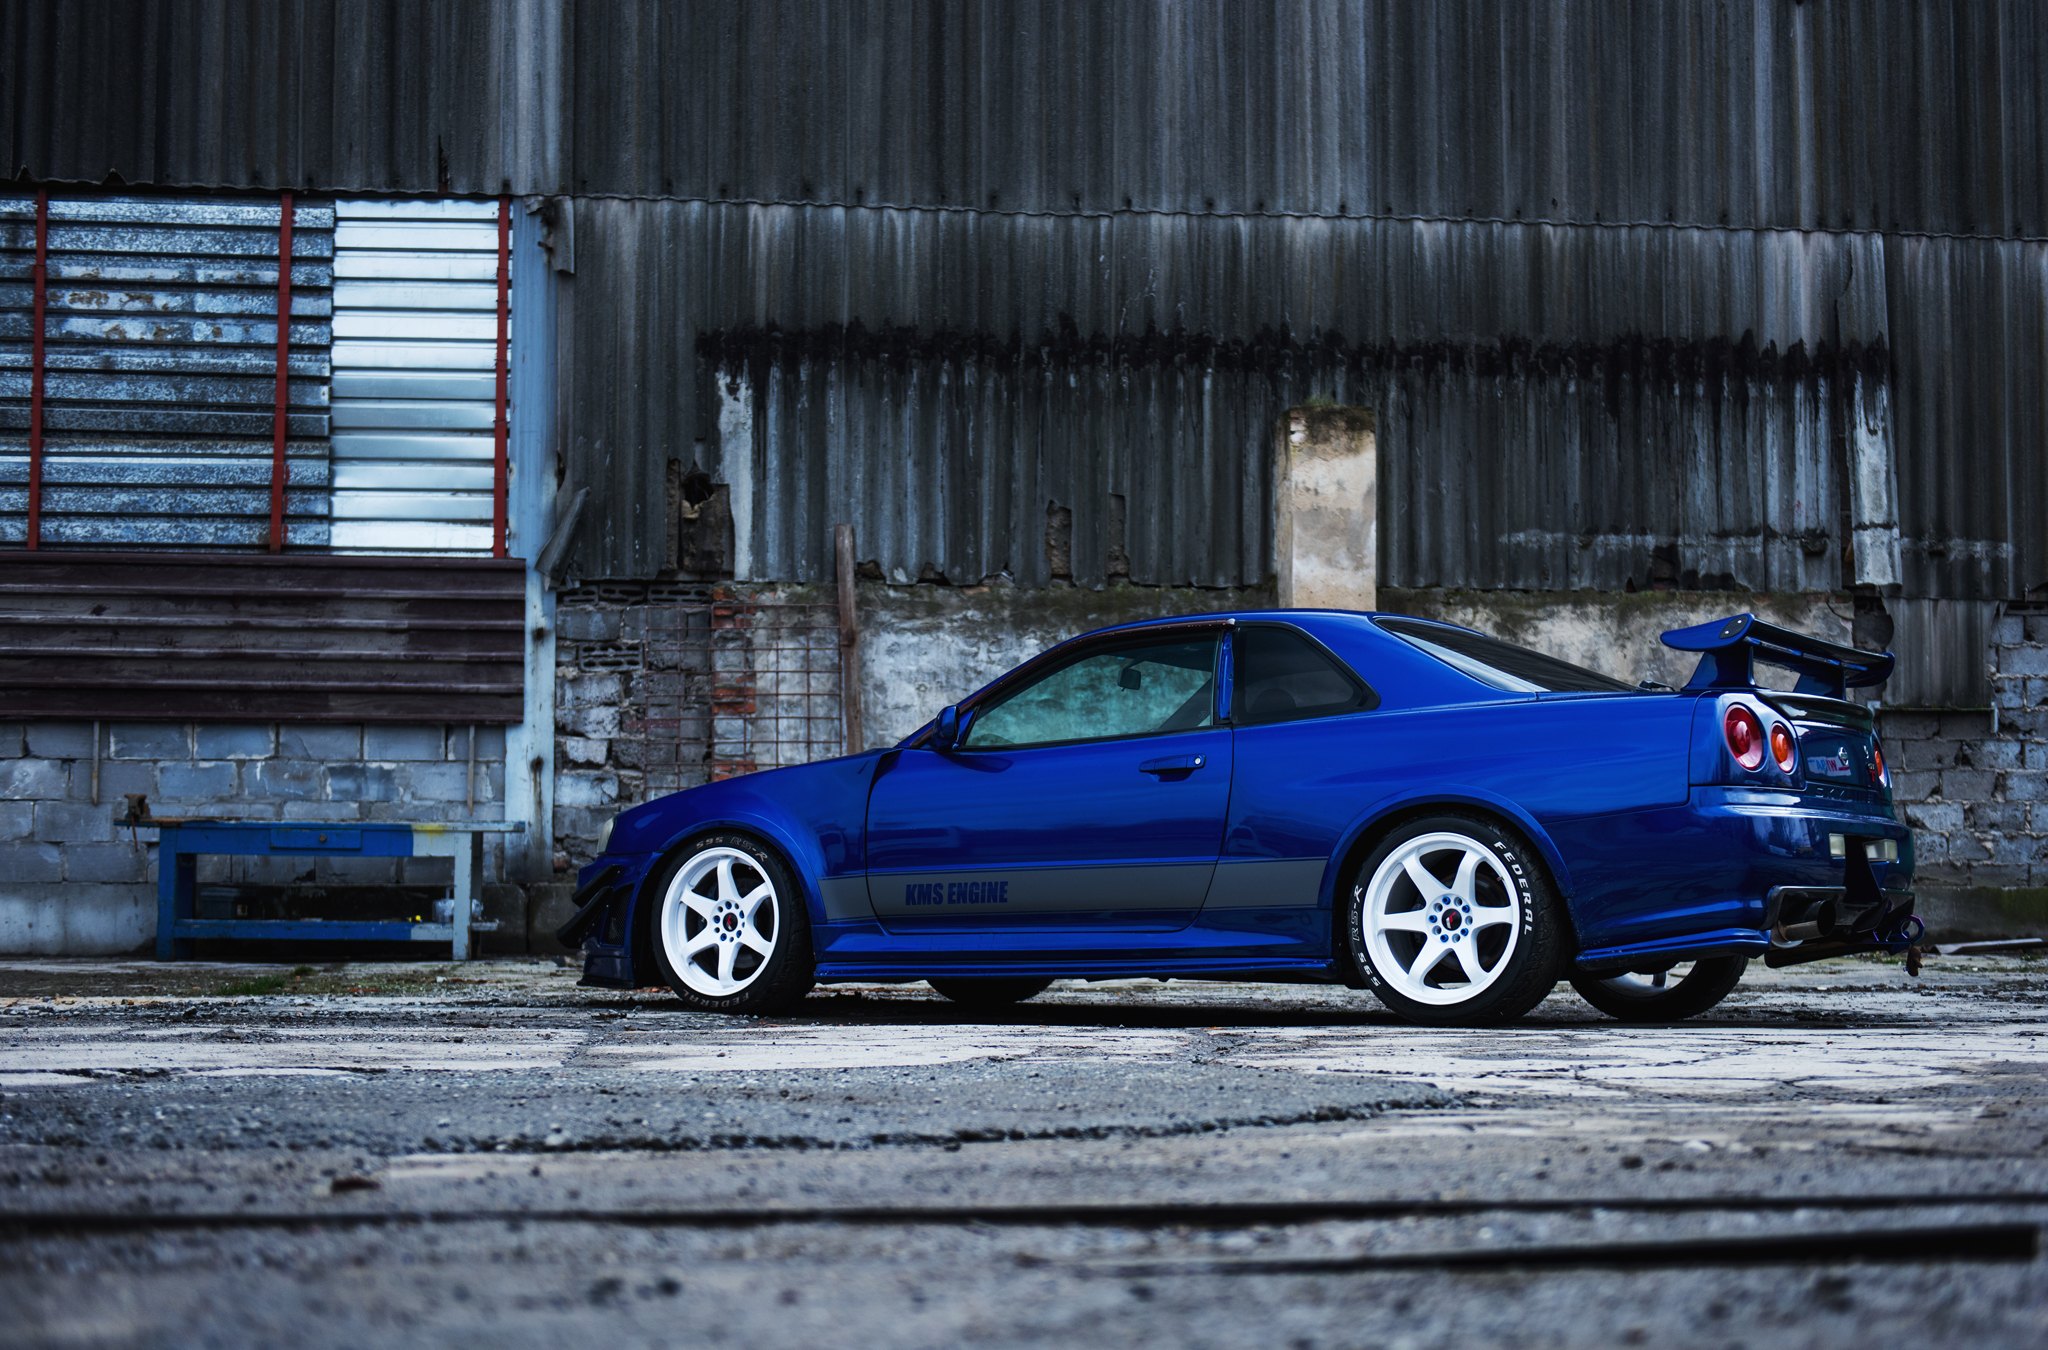 Blue Nissan Skyline with Federal Tires - Photo by JR Wheels